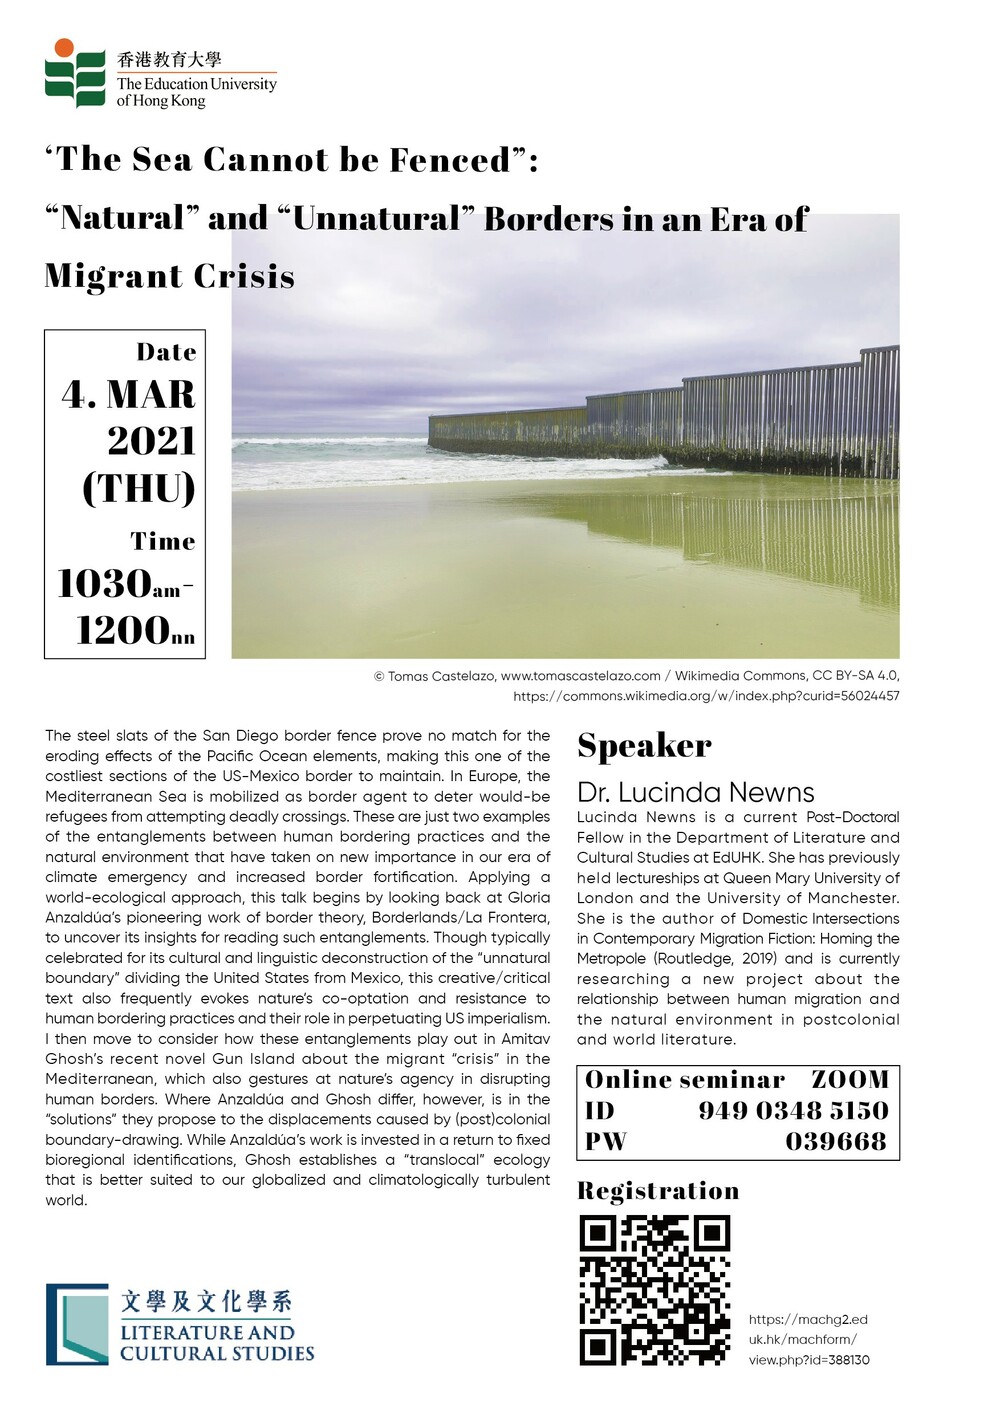 The Sea Cannot be Fenced”: “Natural” and “Unnatural” Borders in an Era of Migrant Crisis